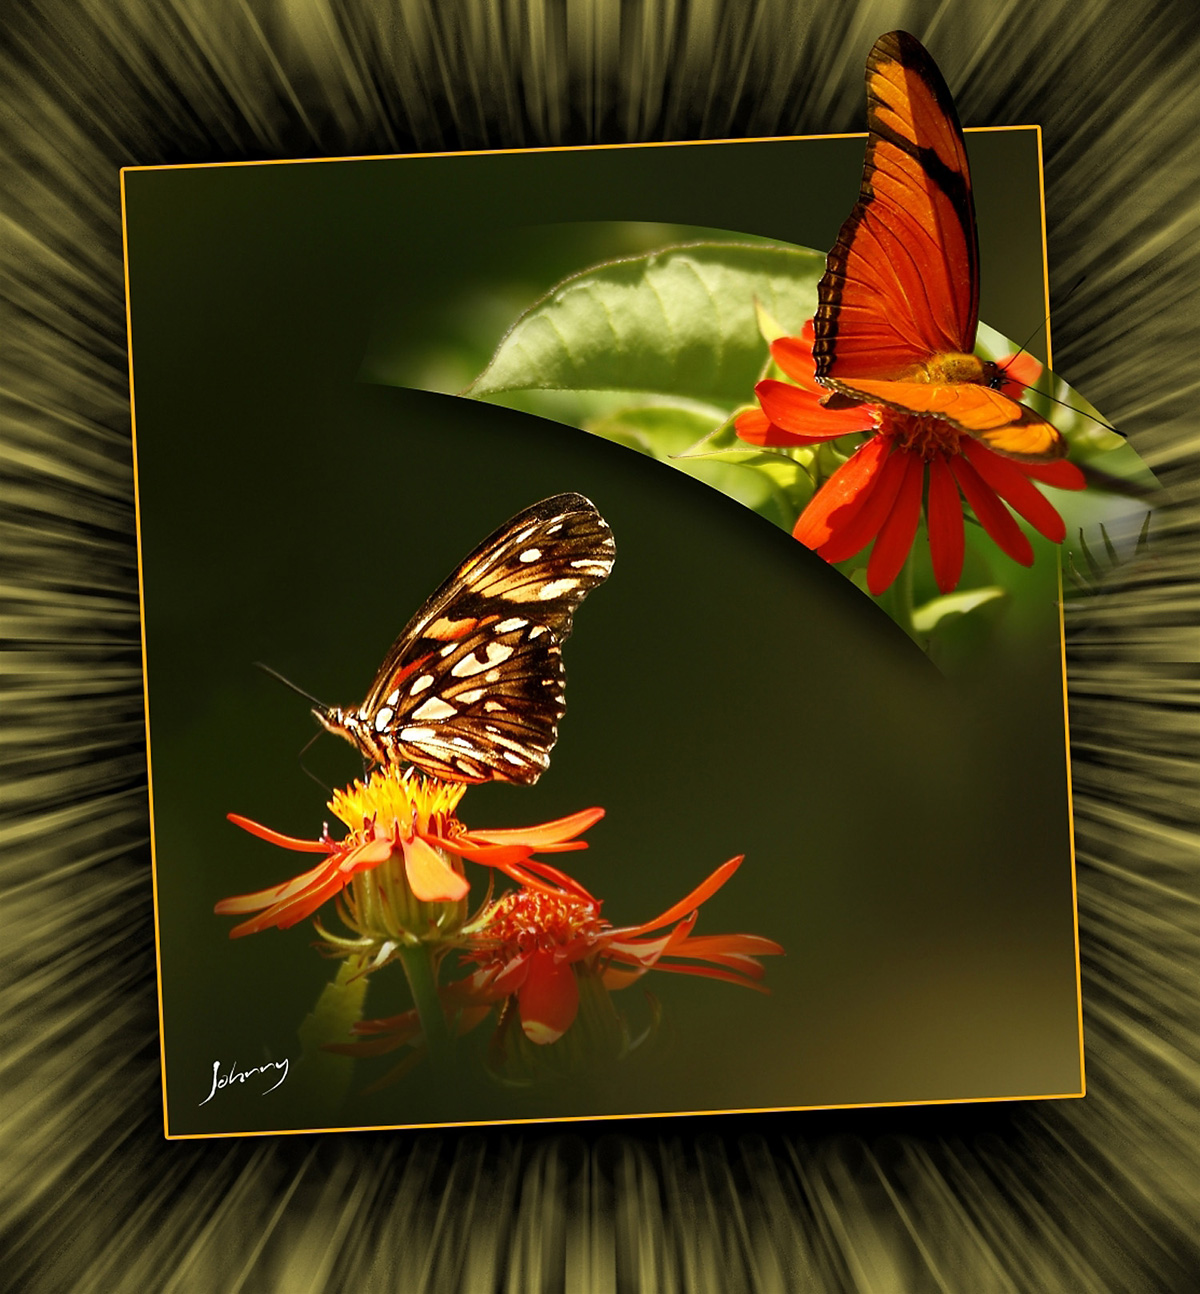 Butterfly<a style='float:right;color:#ccc' href='https://www3.al.sp.gov.br/repositorio/noticia/N-12-2012/fg120111.jpg' target=_blank><i class='bi bi-zoom-in'></i> Clique para ver a imagem </a>